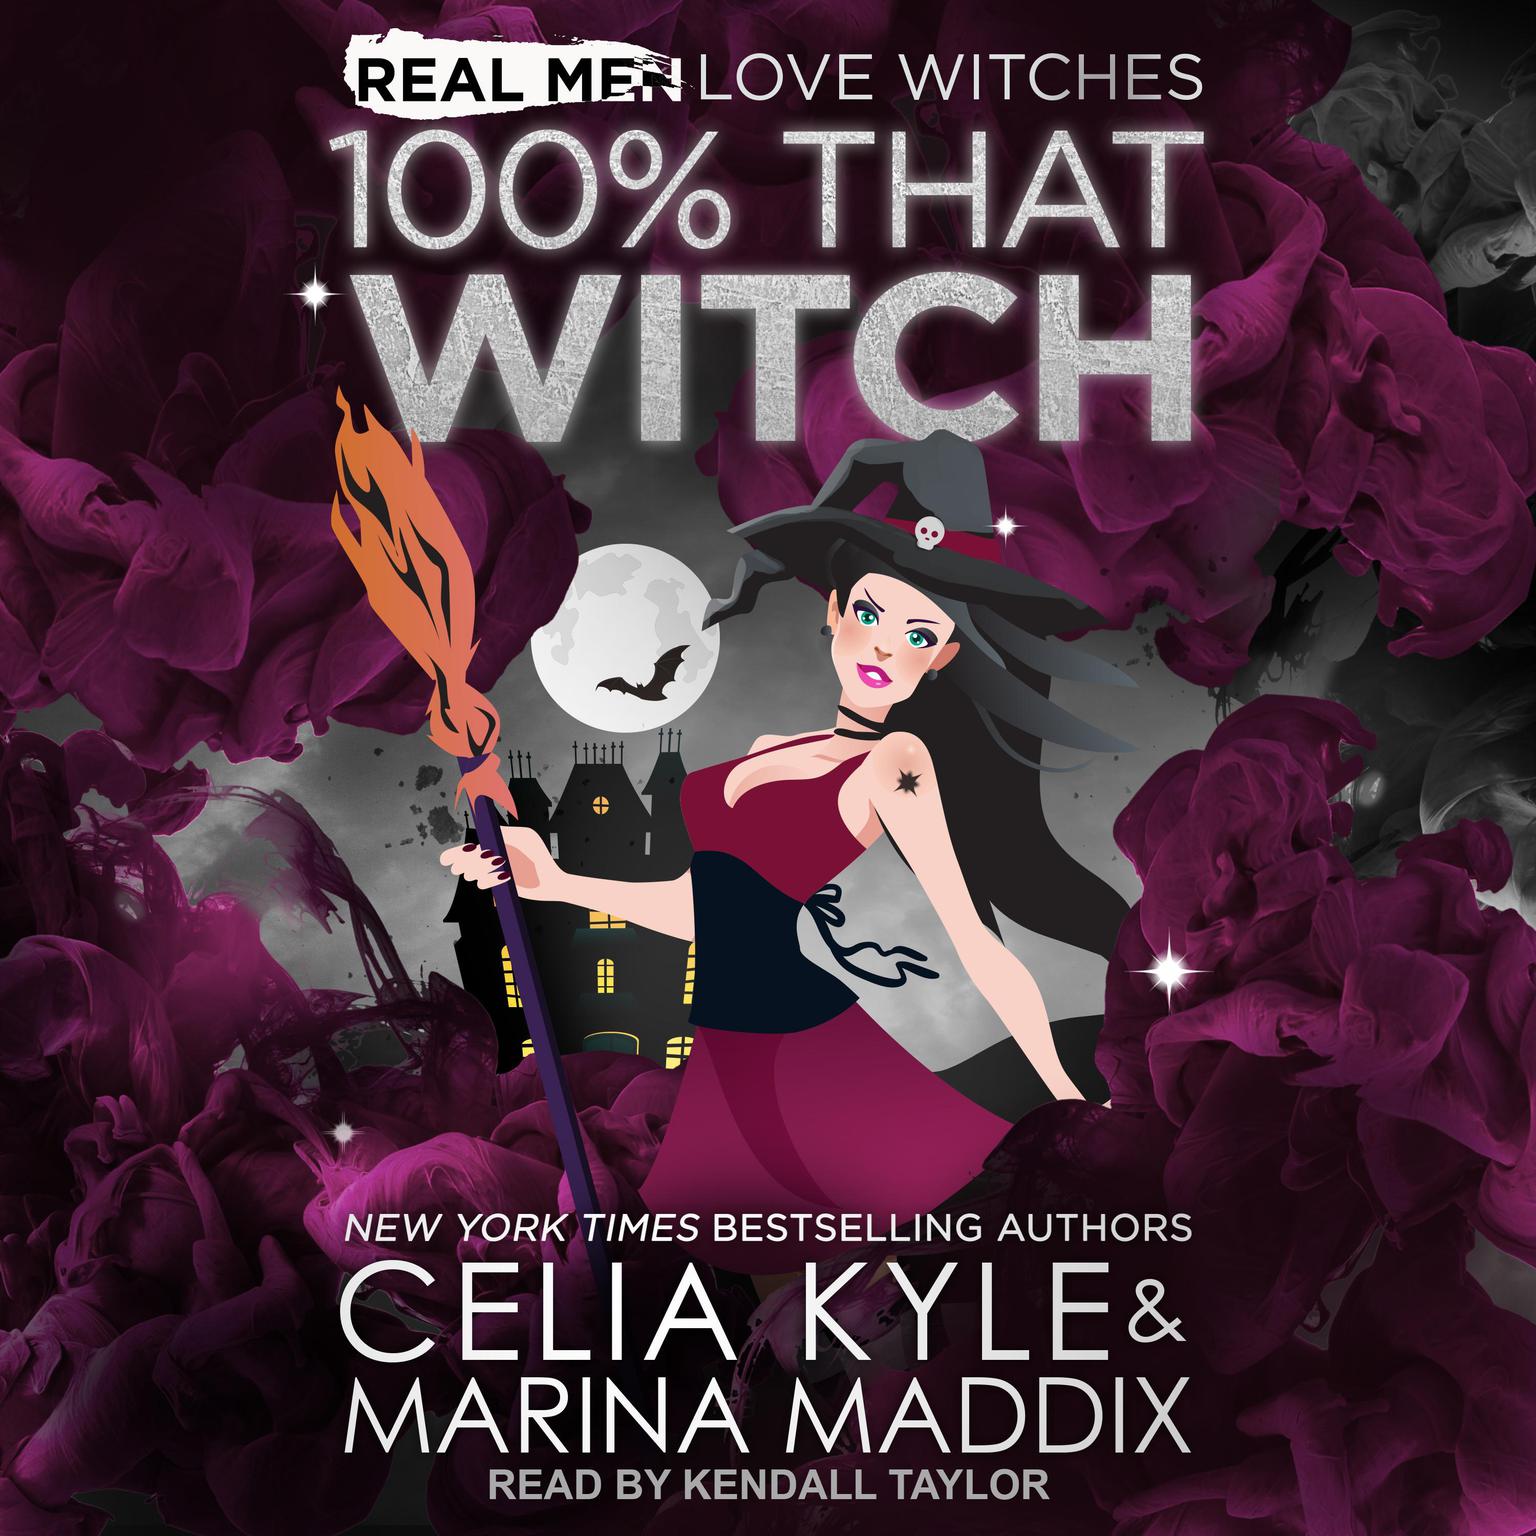 100% That Witch Audiobook, by Celia Kyle